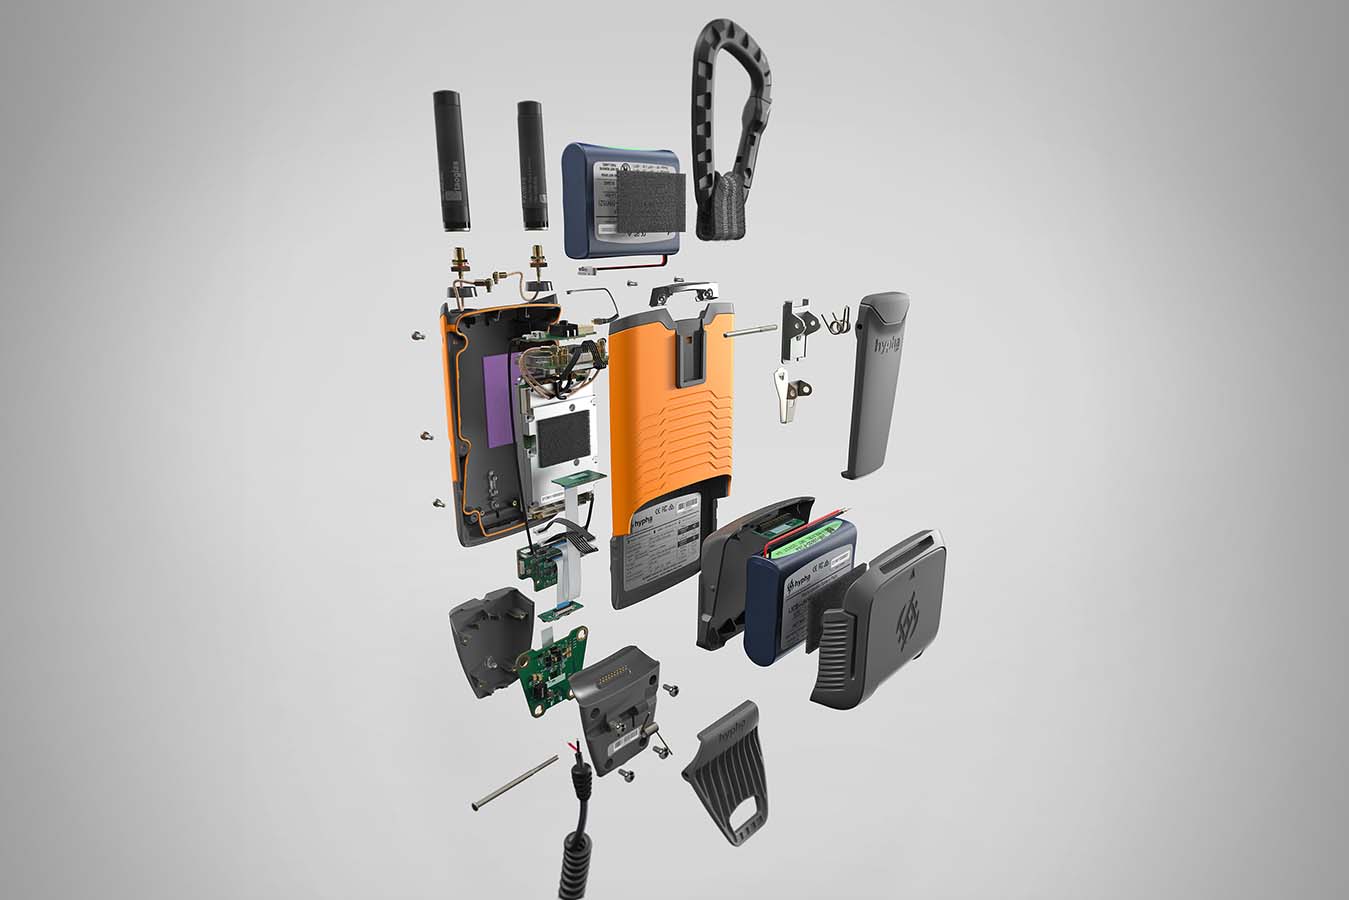 A visualisation of an exploded view on the assembly and internal components of the HyphaCAP device.